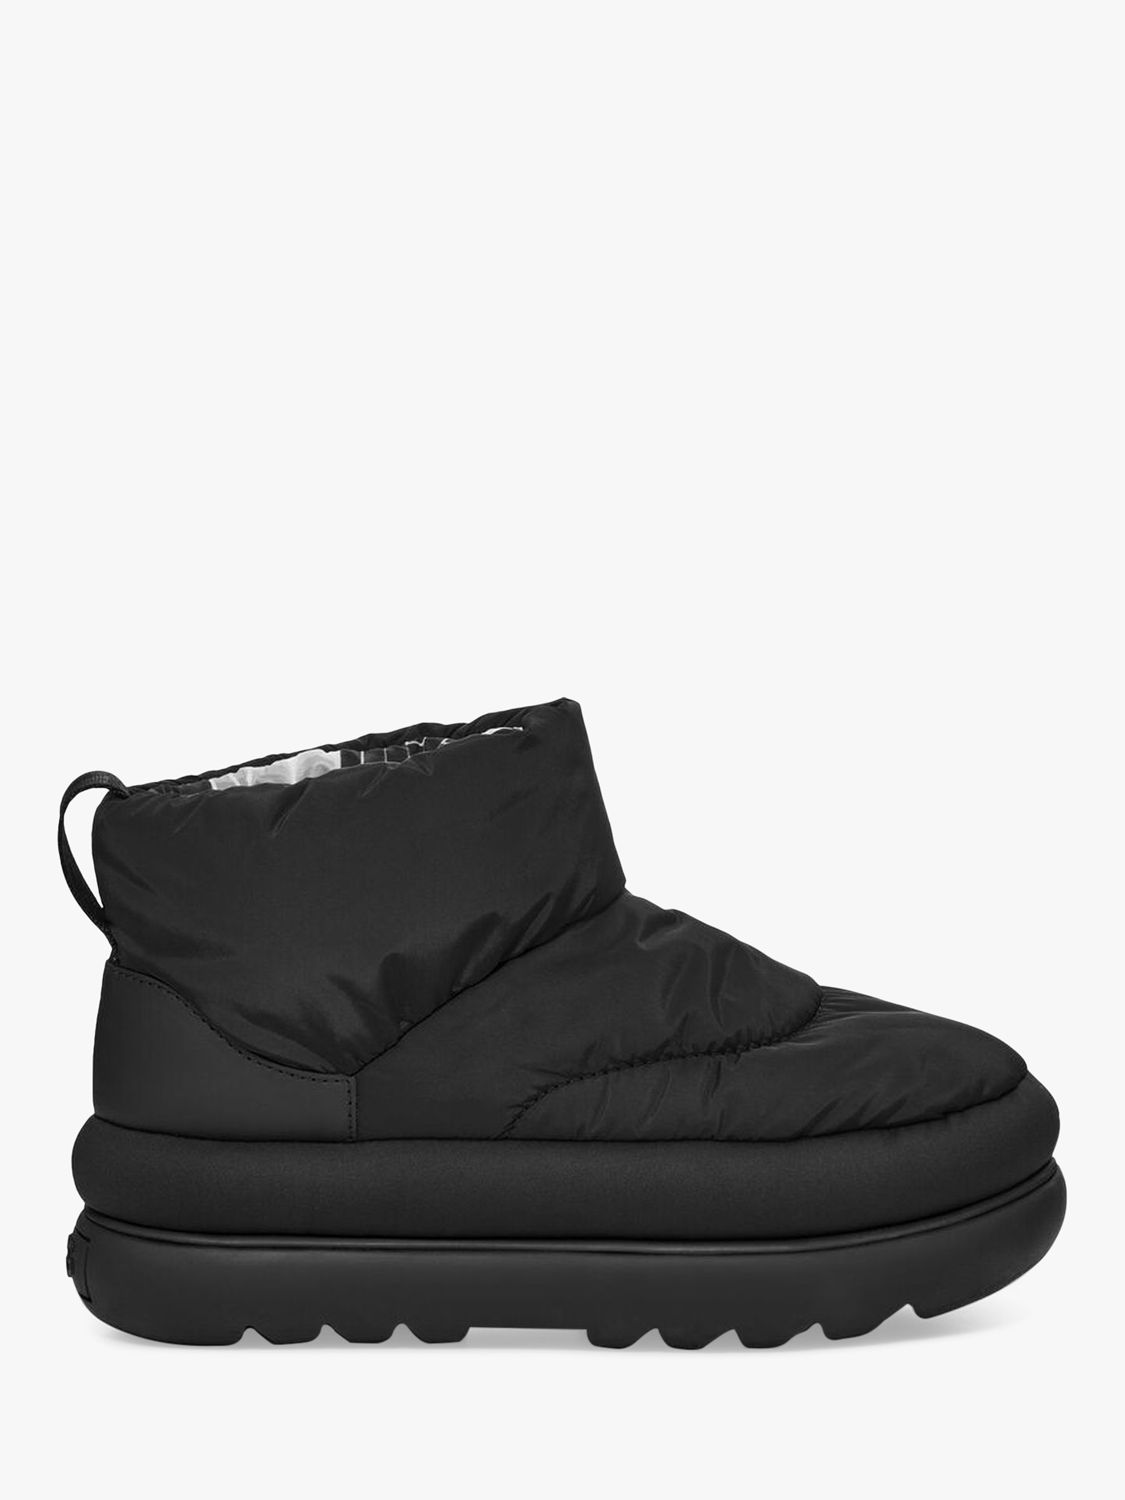 UGG Classic Puff Ankle Boots, Black at John Lewis & Partners